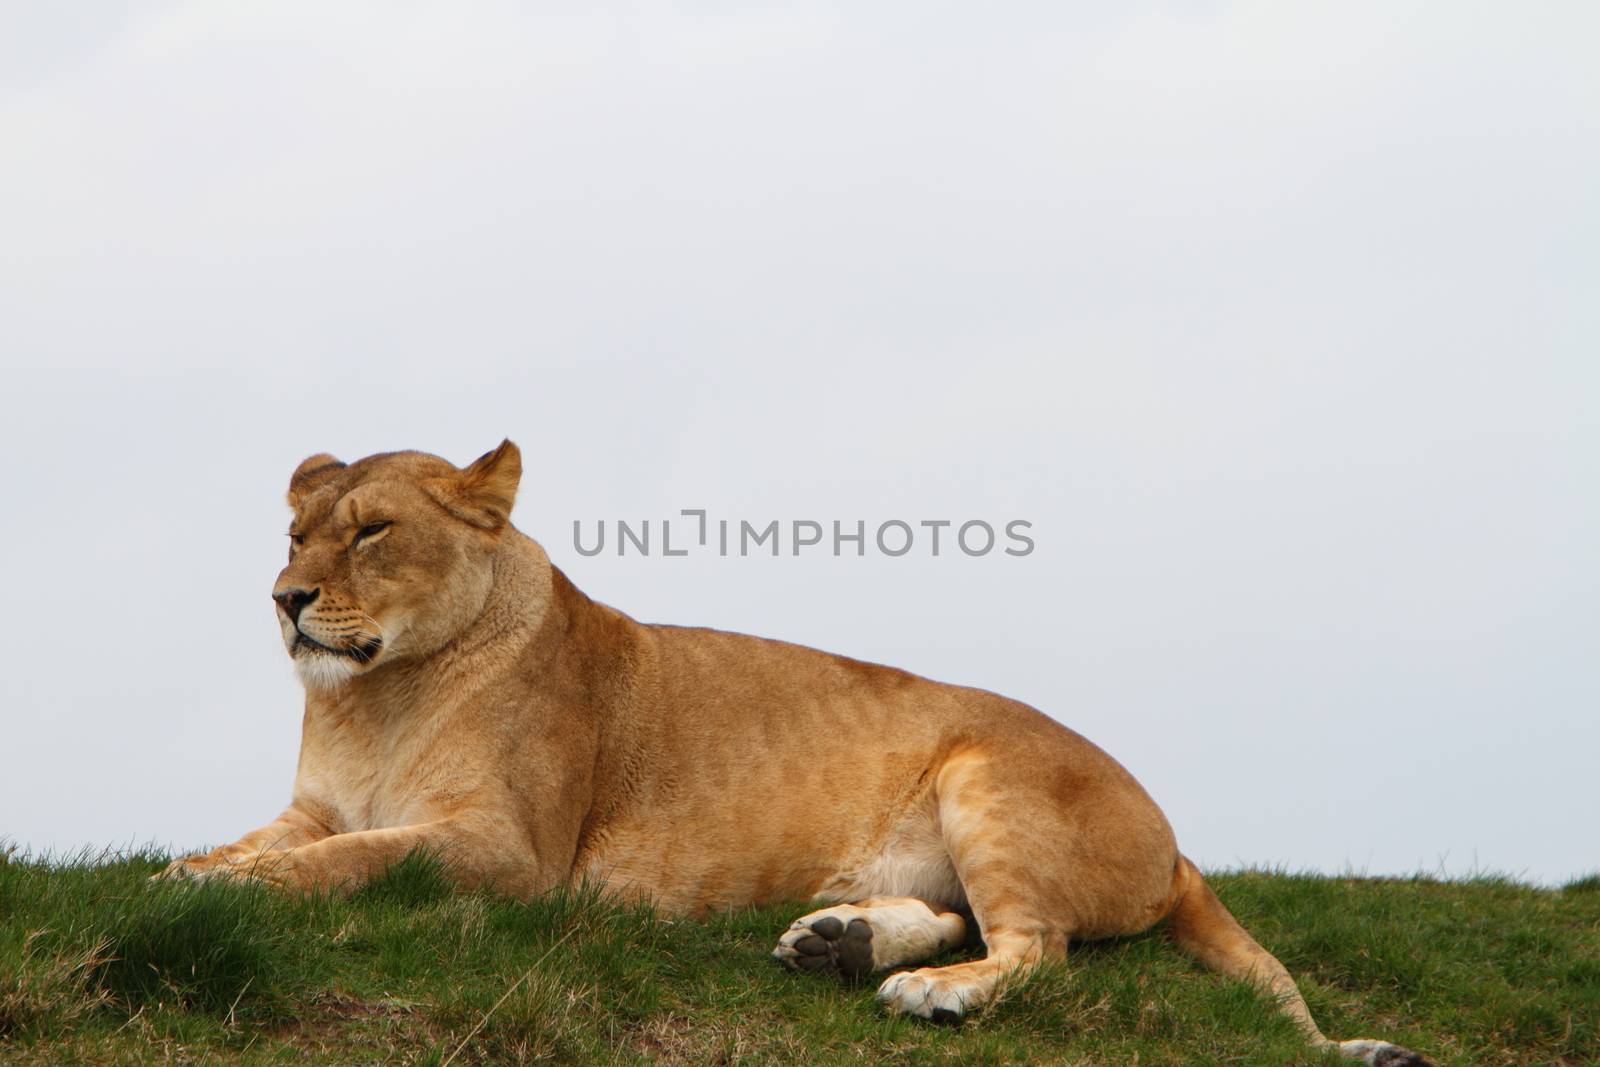 Lioness (Panthera Leo) by mitzy